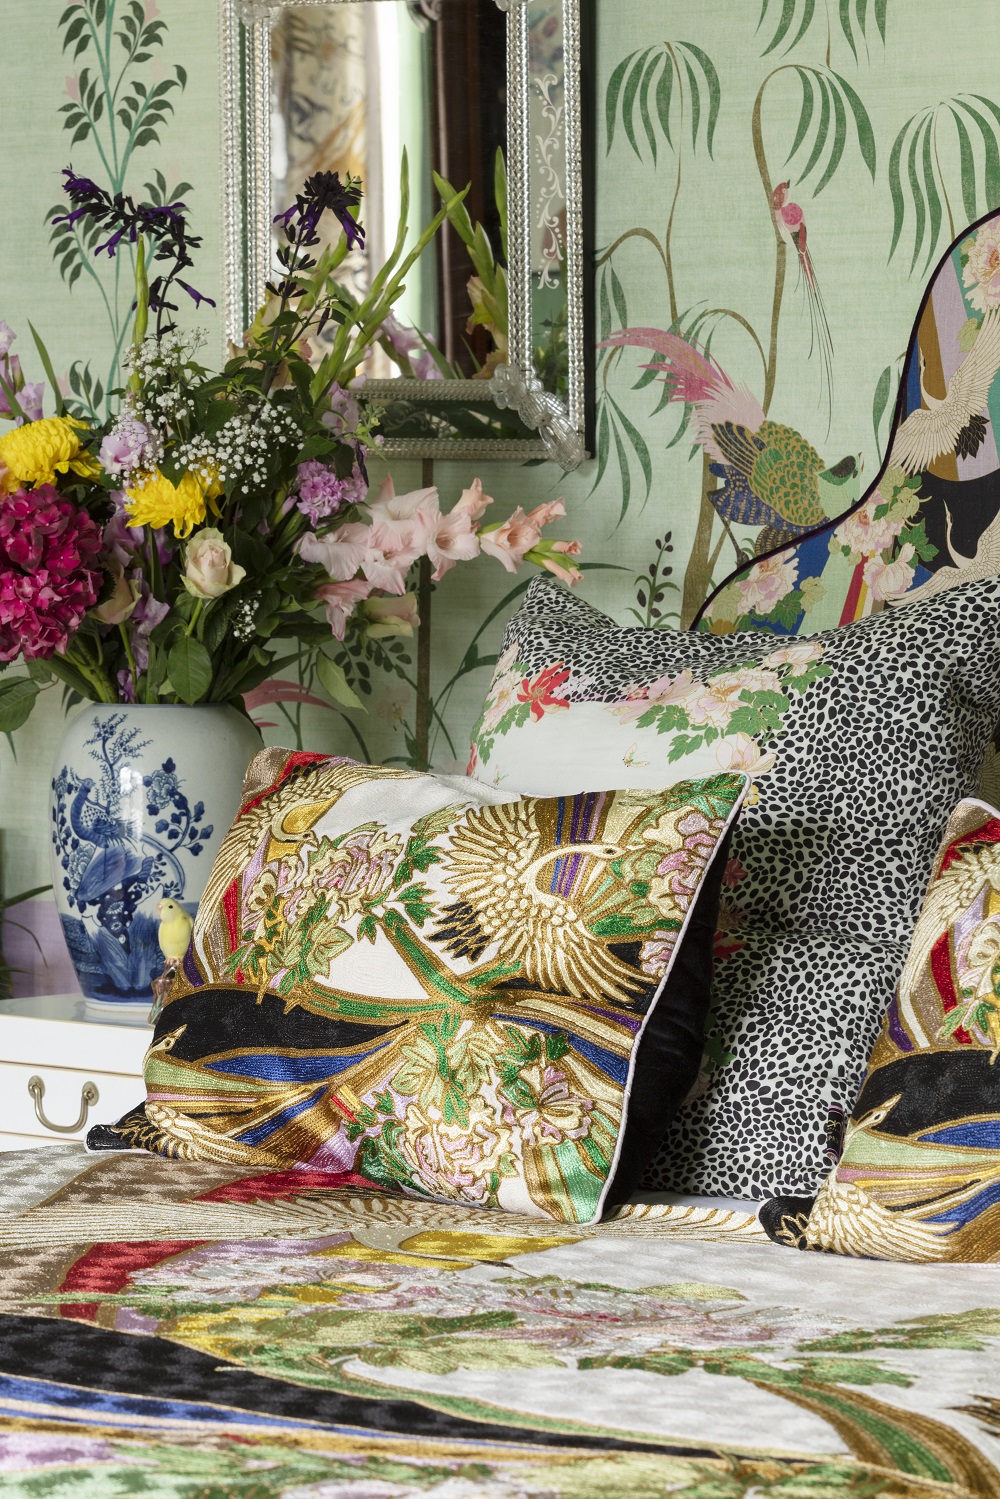 A detail of cushions and fabrics by Wendy Morrison Design